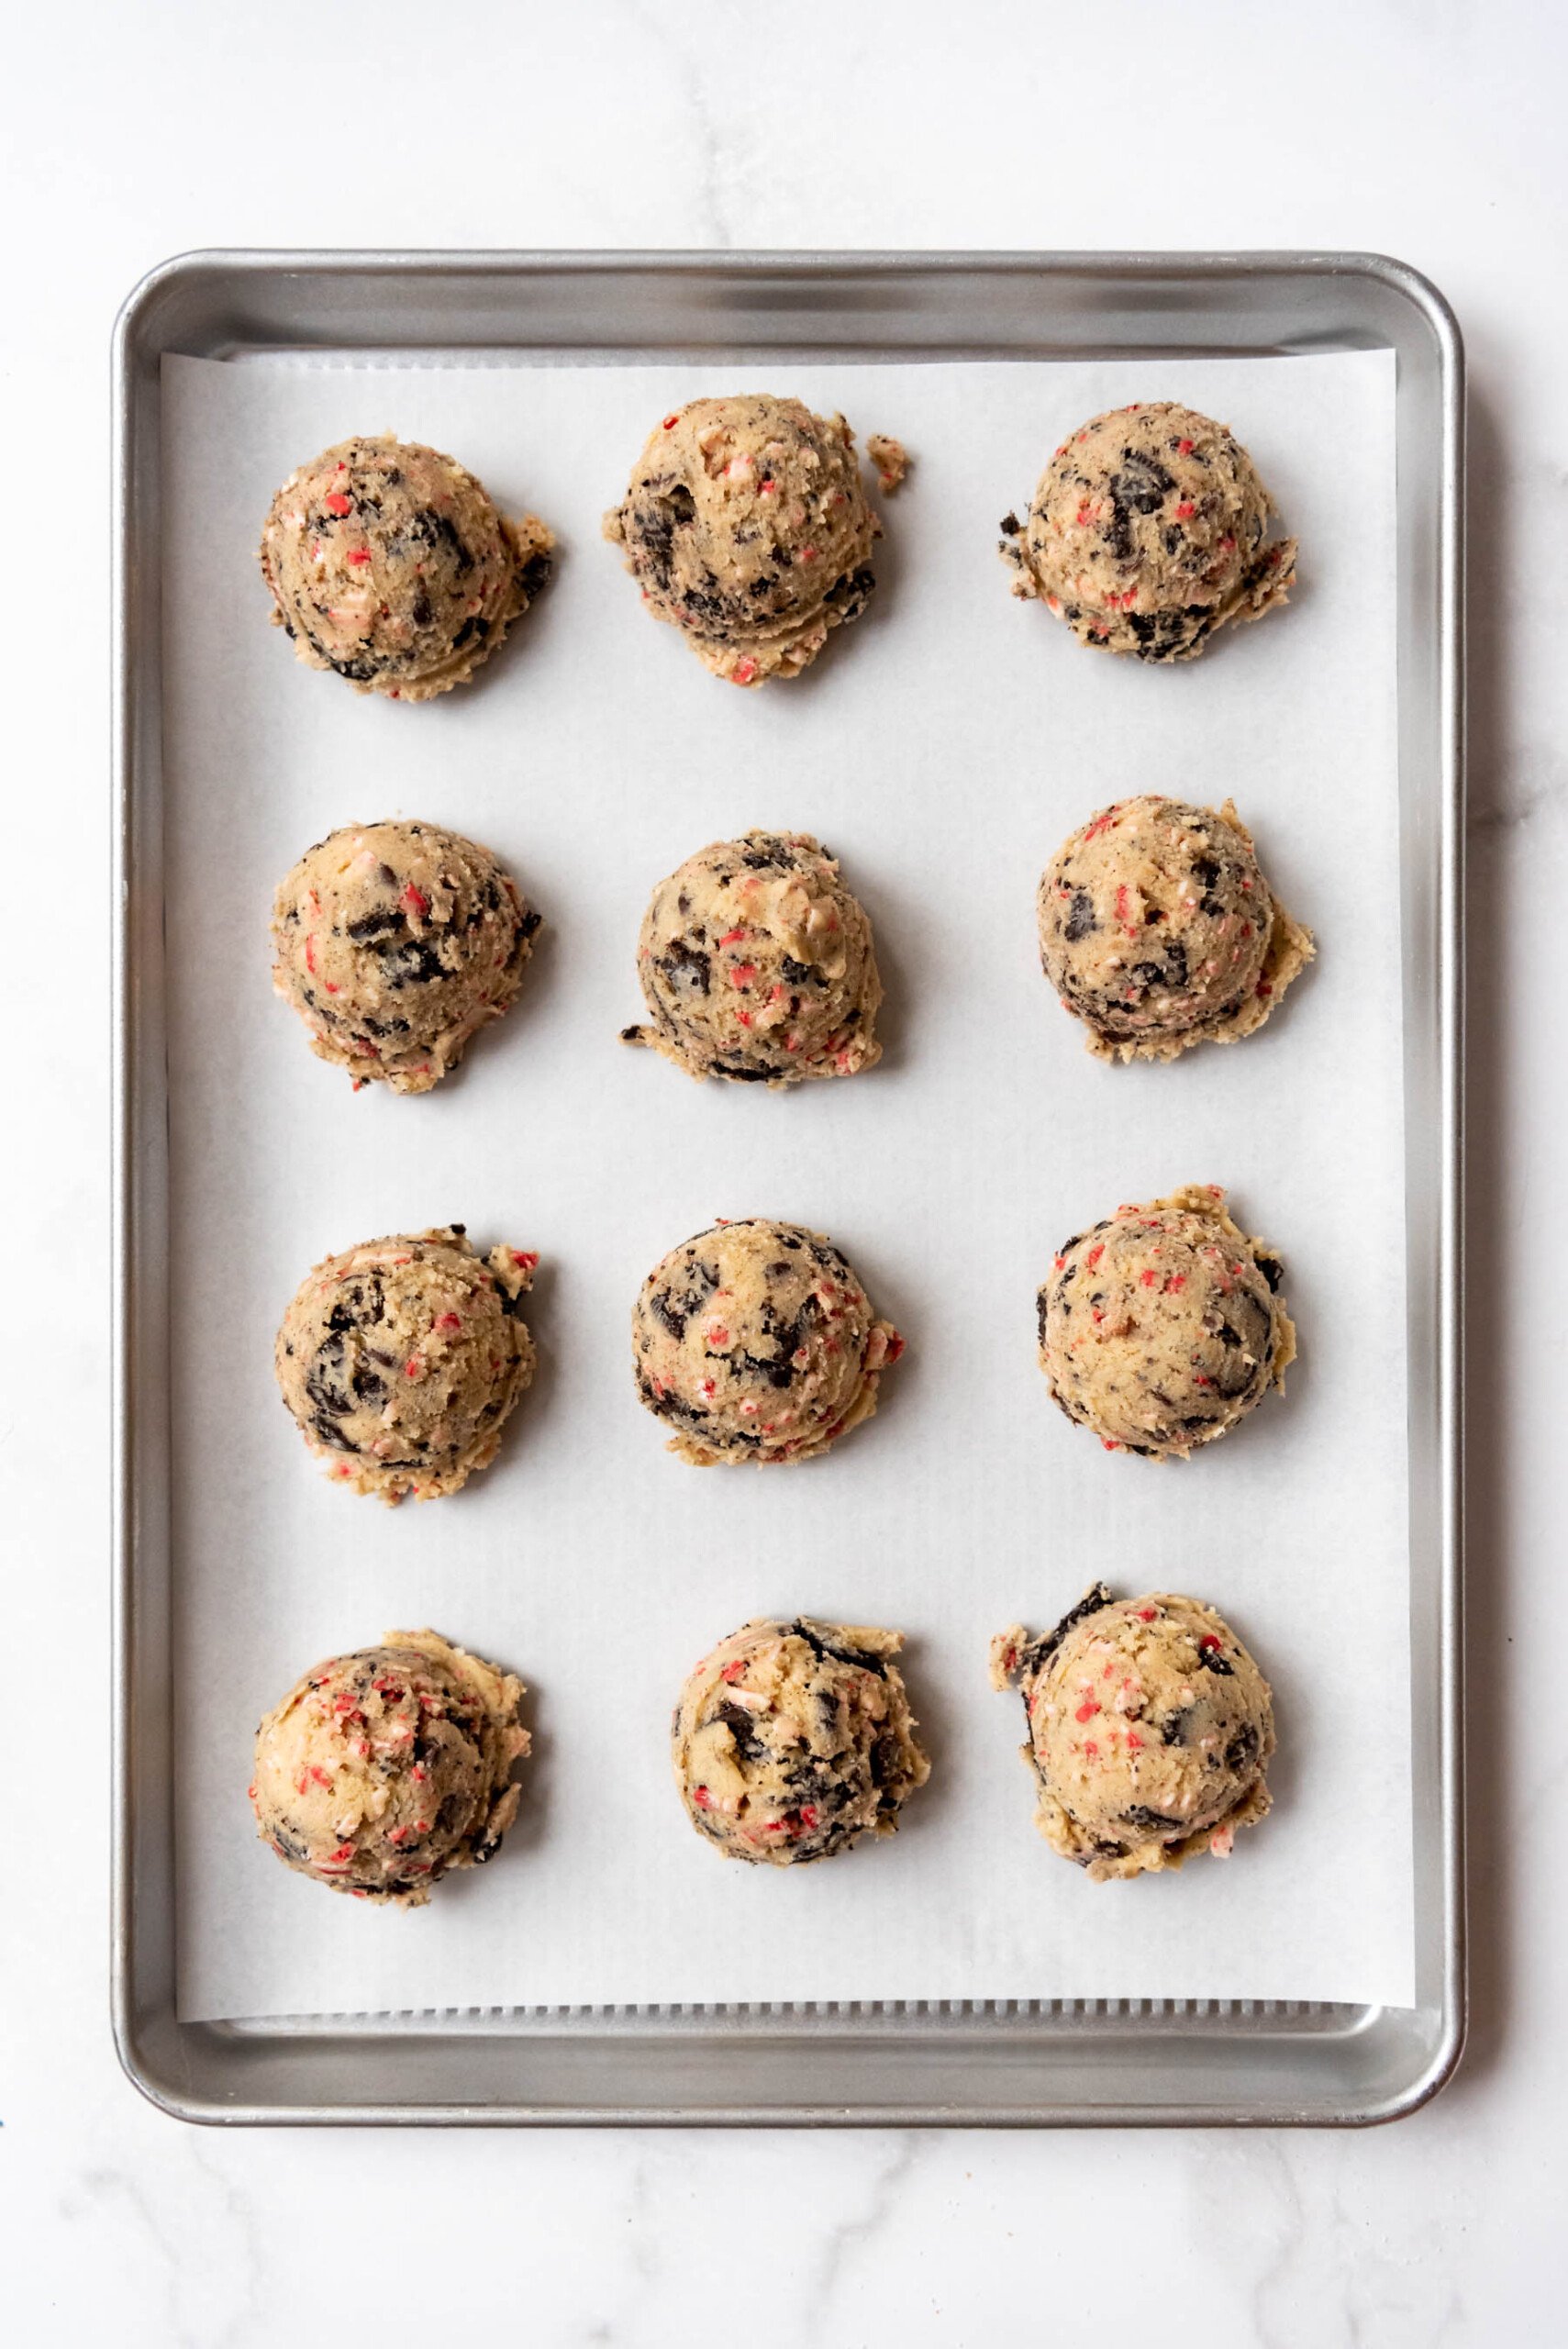 Balls of peppermint Oreo cookie dough on a baking sheet lined with parchment paper.